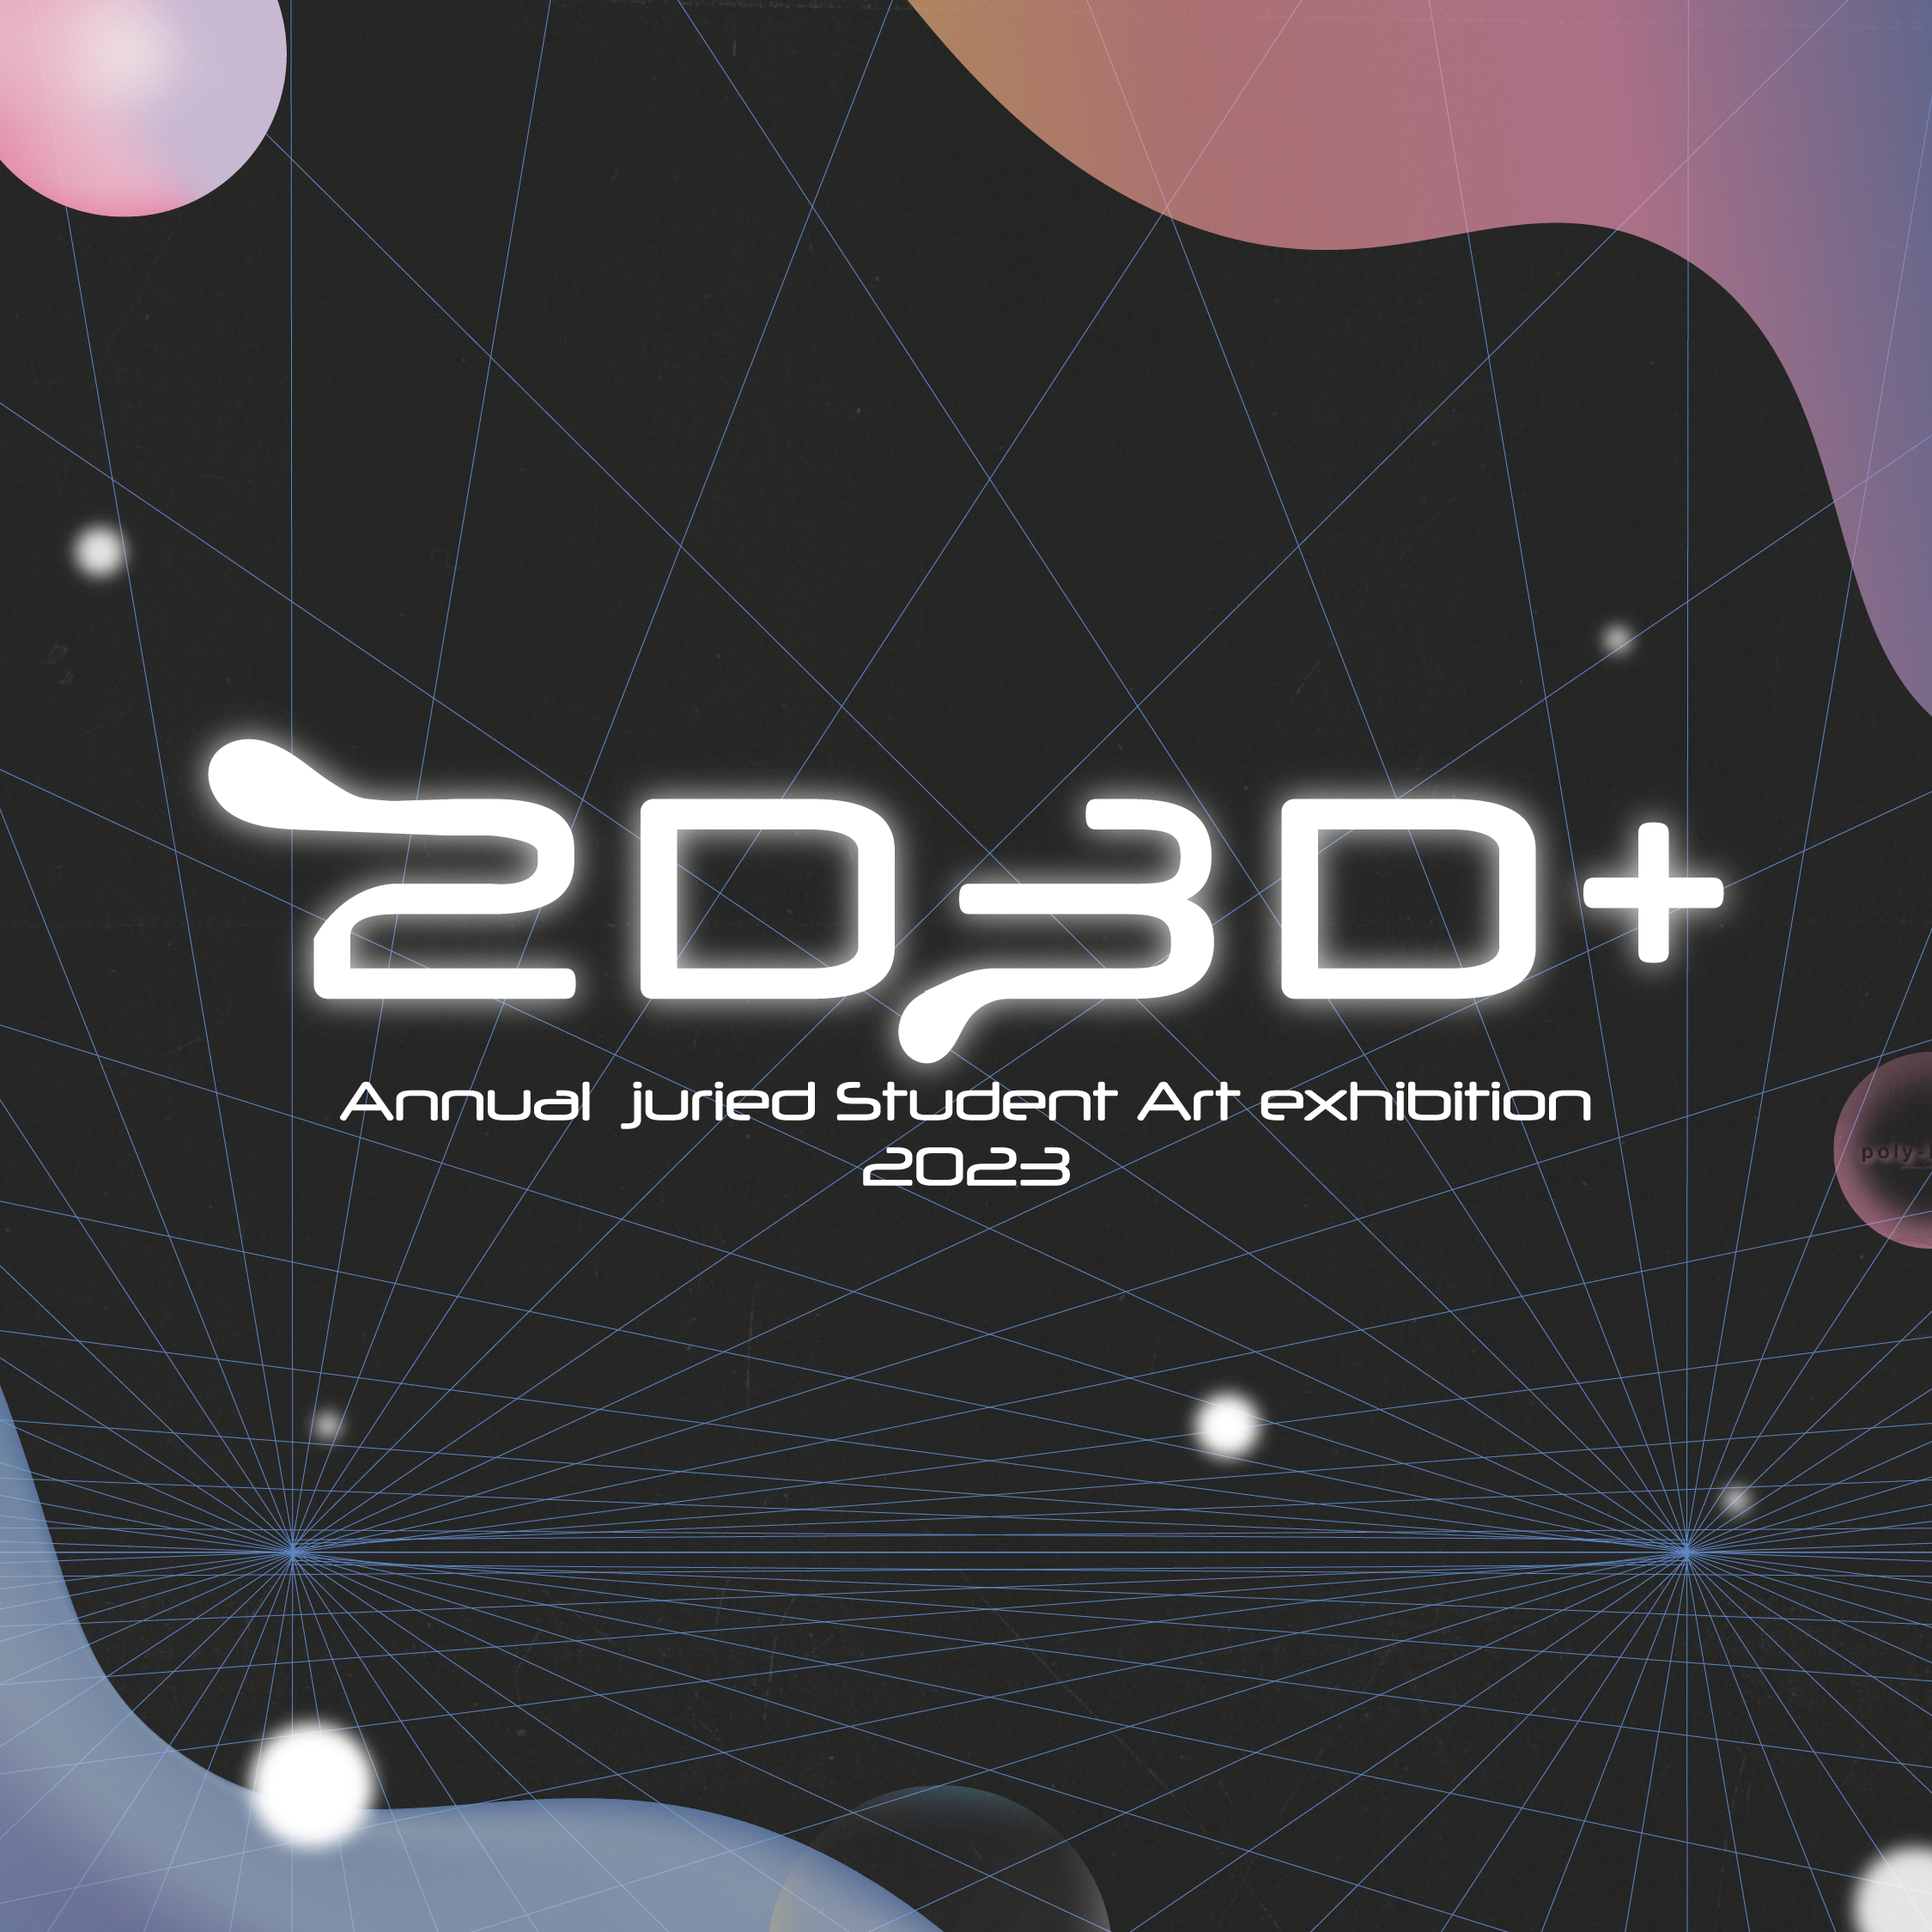 2D3D+ Annual Juried Student Art Exhibition 2023